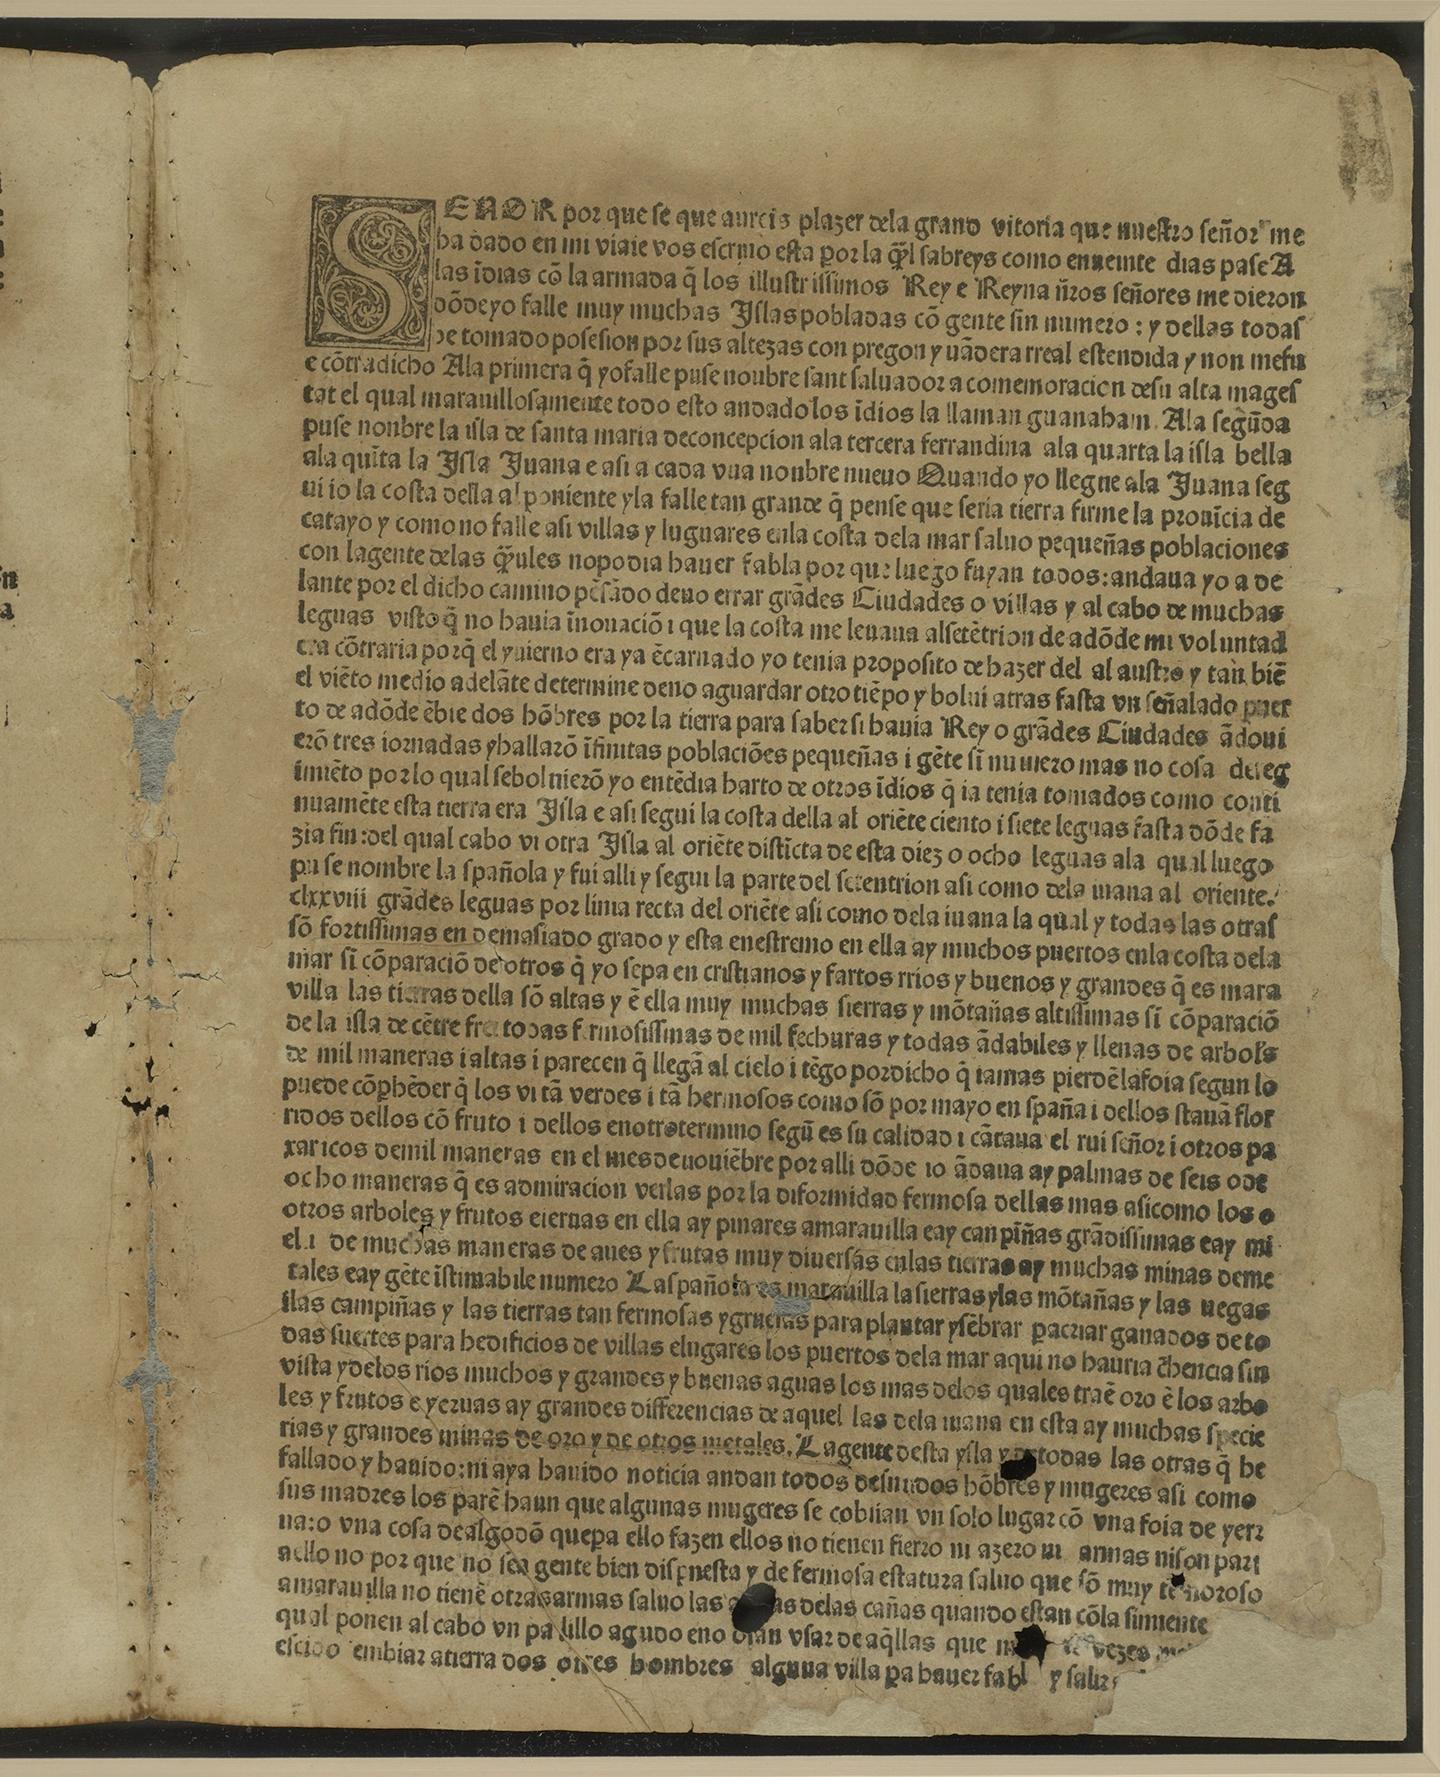 Christopher Columbus The first edition of a letter wrote in 1493 that was circulated among Spanish readers - New York Public Library